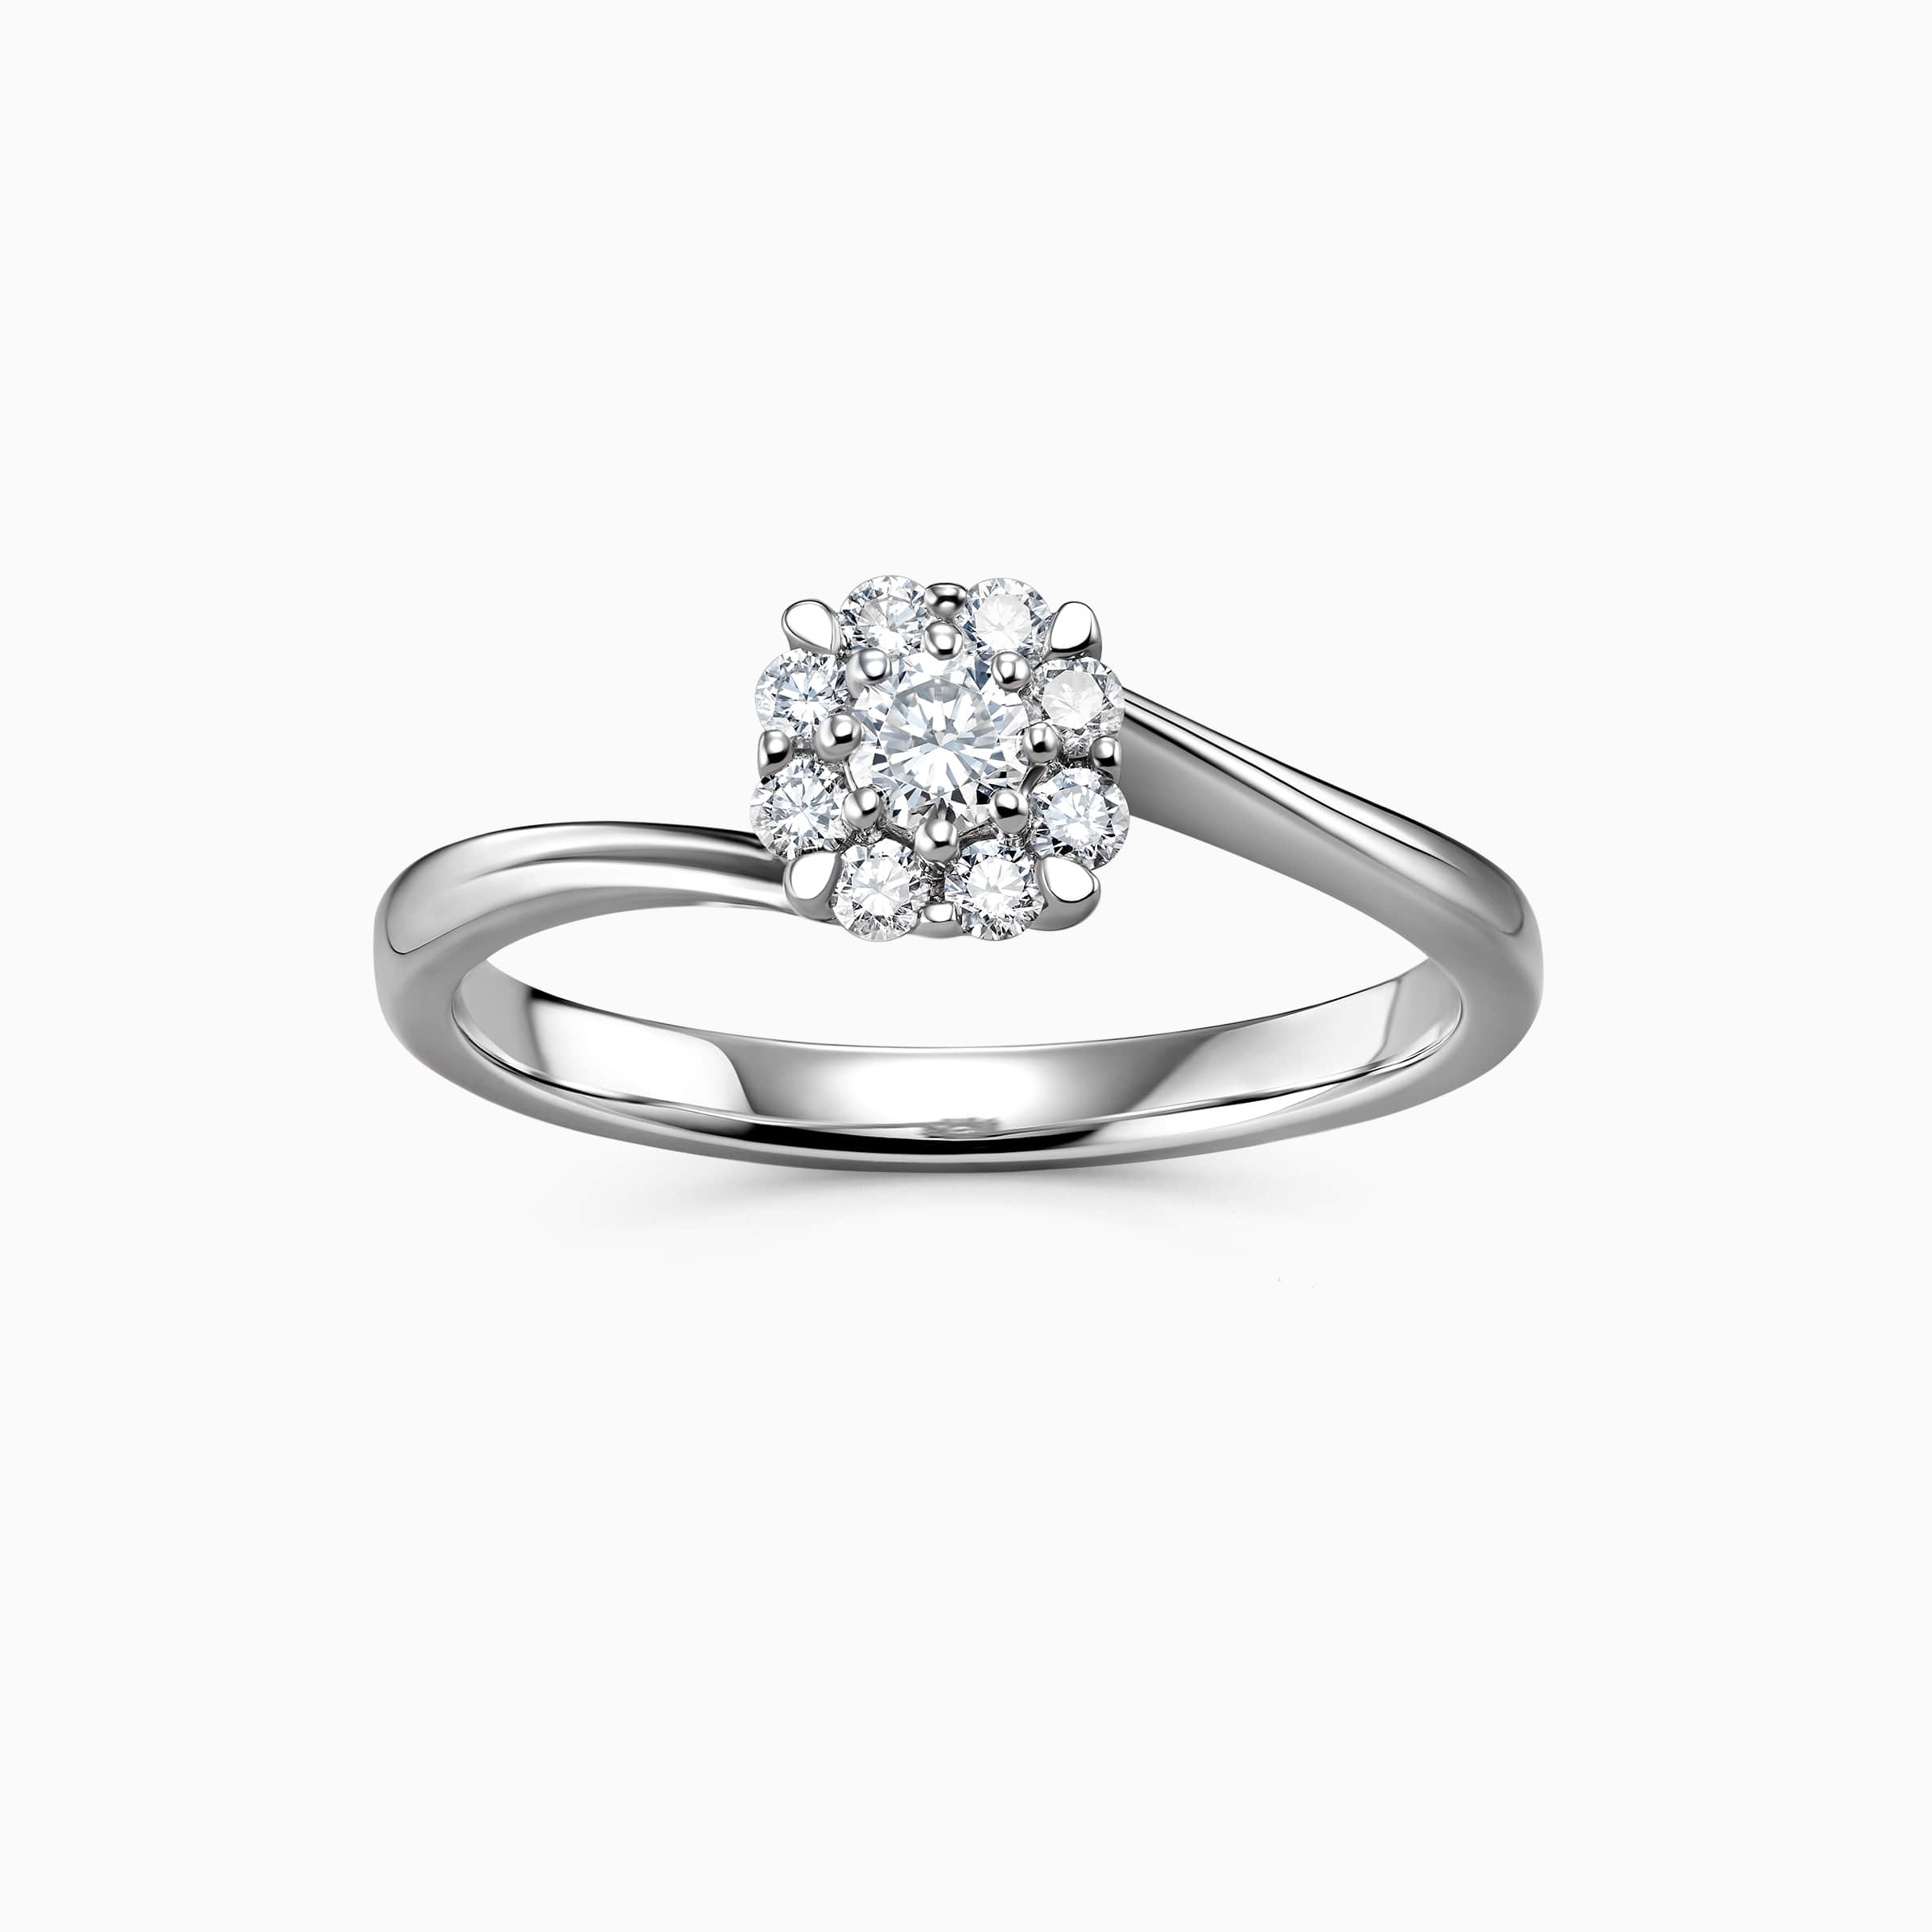 Darry Ring unique halo promise ring white gold